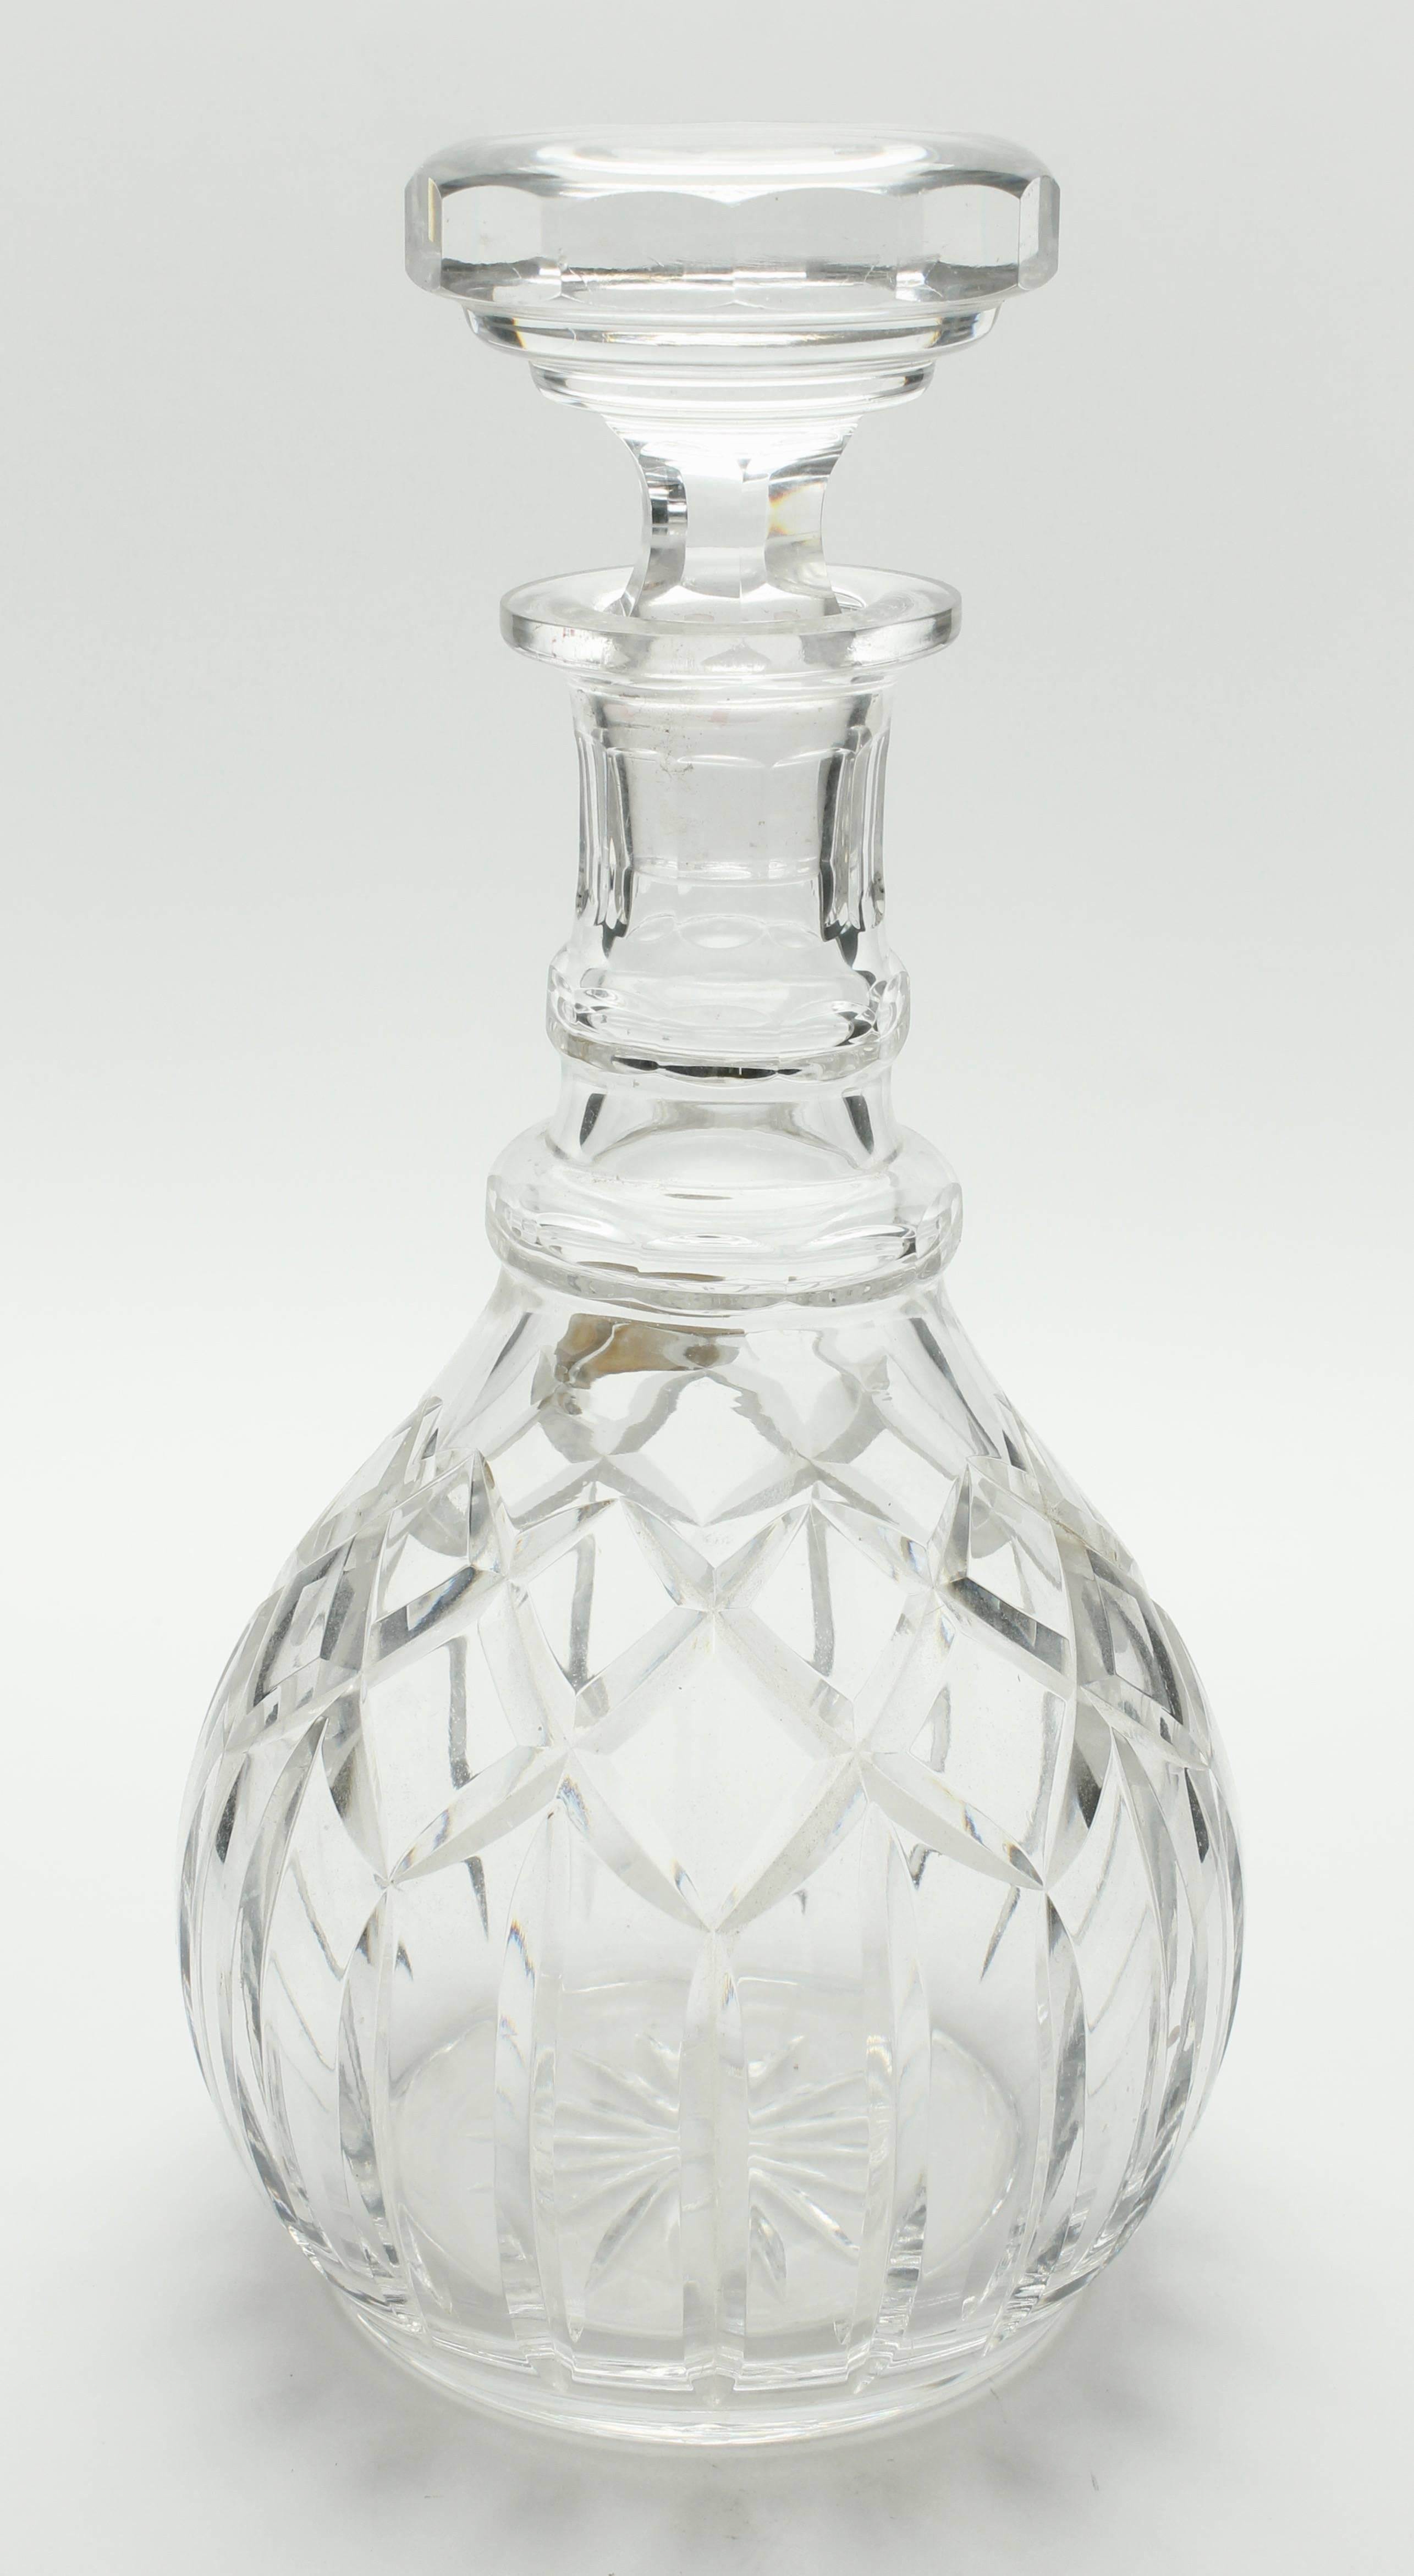 Faceted Val Saint Lambert Cut-Crystal Decanter 20th Century, Founded in 1826, Belgium For Sale